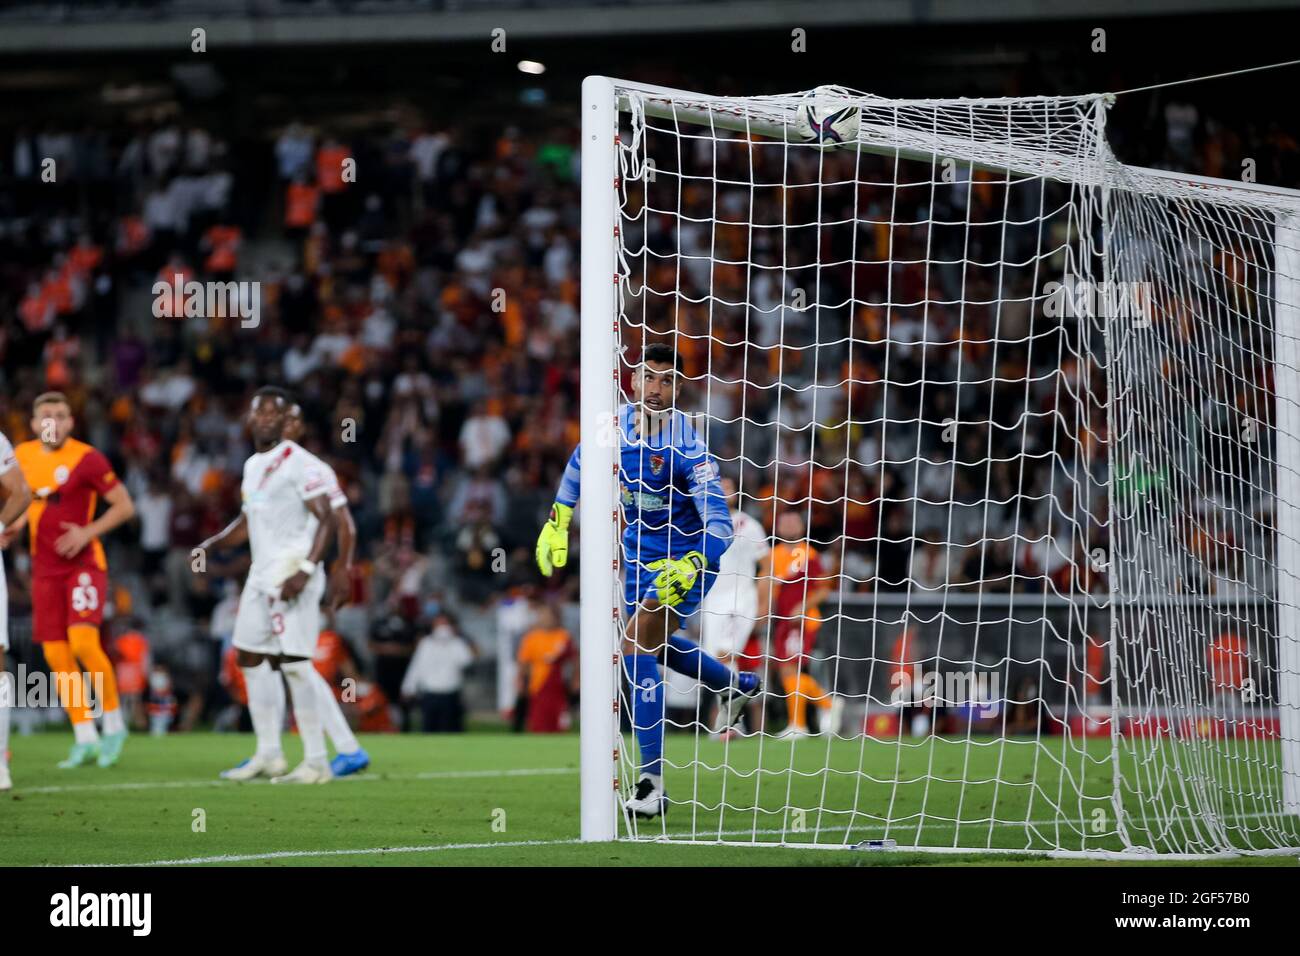 ISTANBUL, TURKEY - AUGUST 23: Munir Mohamedi of Hatayspor concedes his sides second goal during the Super Lig match between Galatasaray and Hatayspor at the Ataturk Olimpiyat Stadium on August 23, 2021 in Istanbul, Turkey (Photo by Orange Pictures) Stock Photo